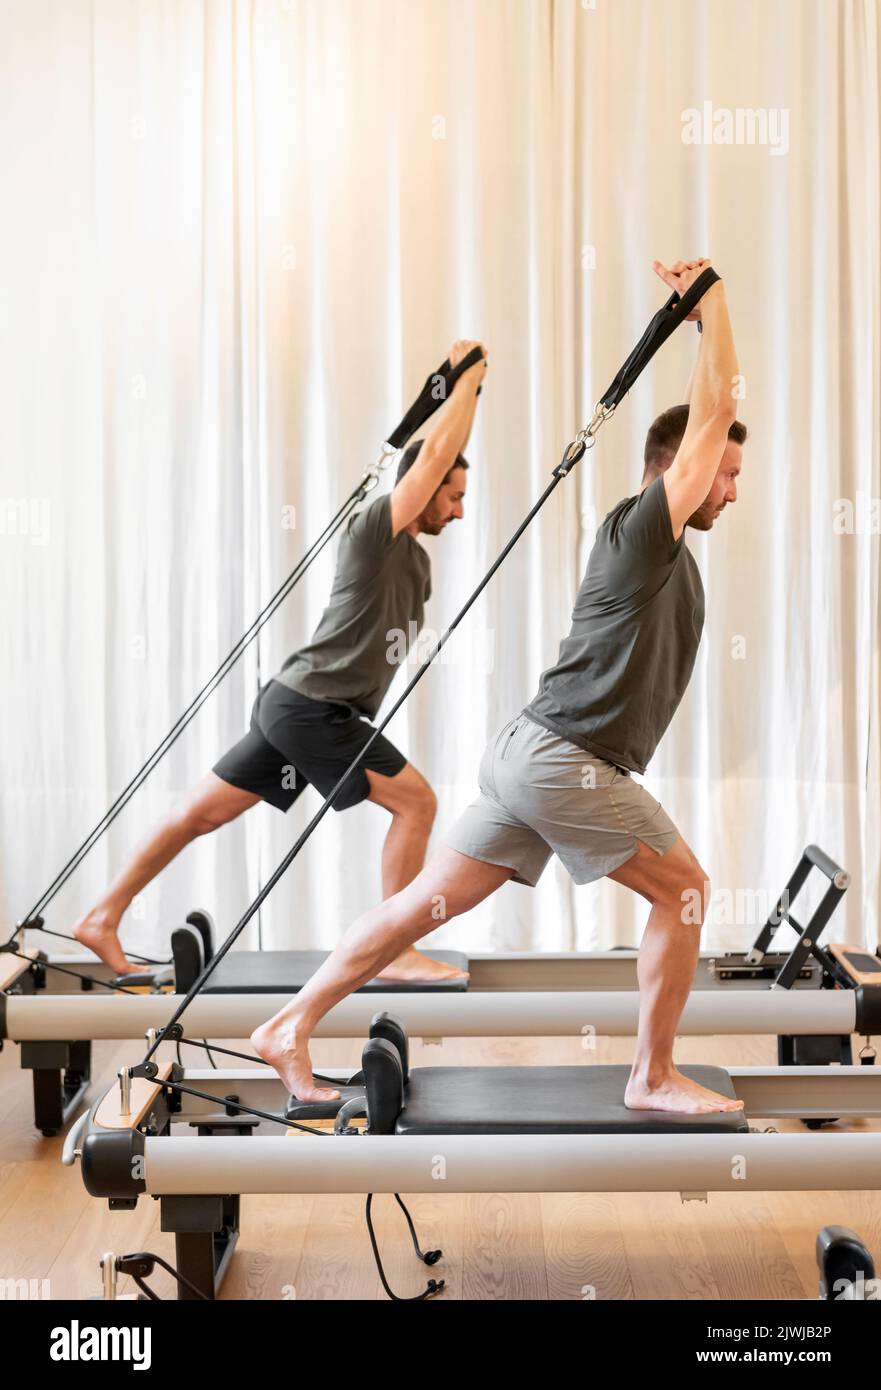 Full body side view of sportive men doing pilates saute exercise on reformer beds during training together in light gym Stock Photo